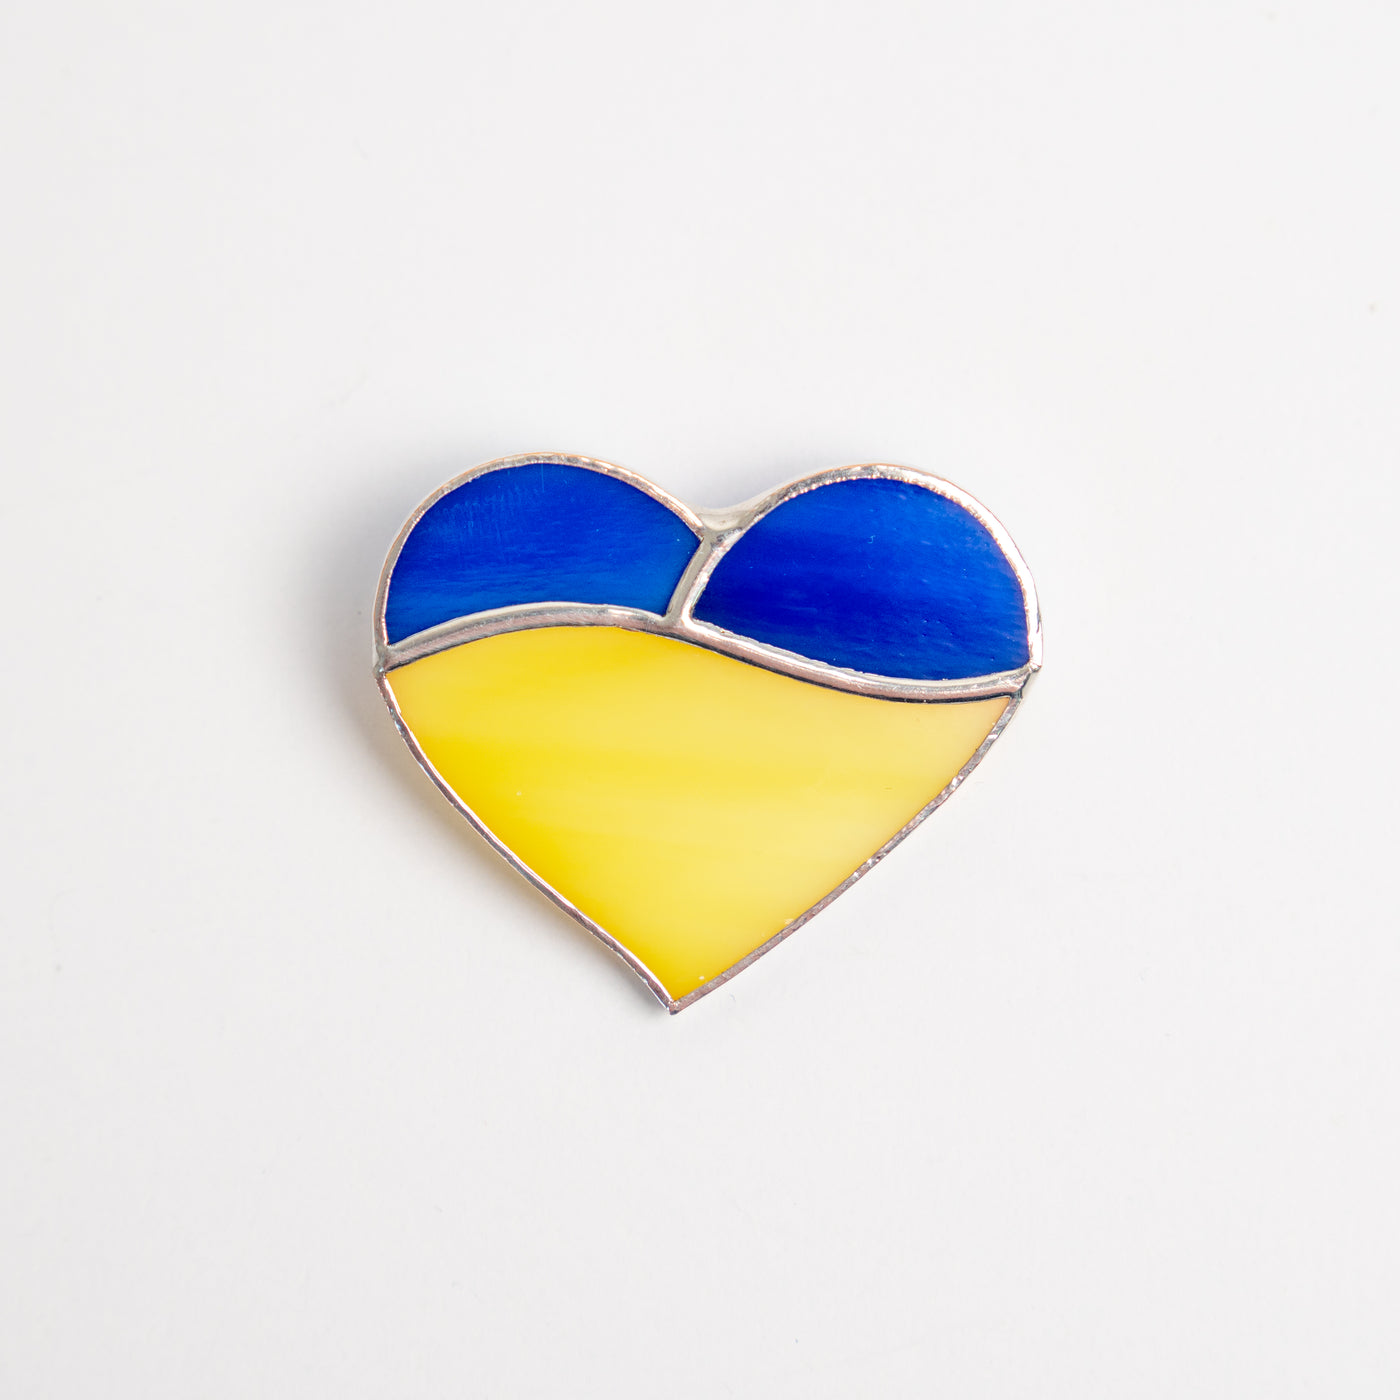 Stained glass dark-blue and yellow heart brooch